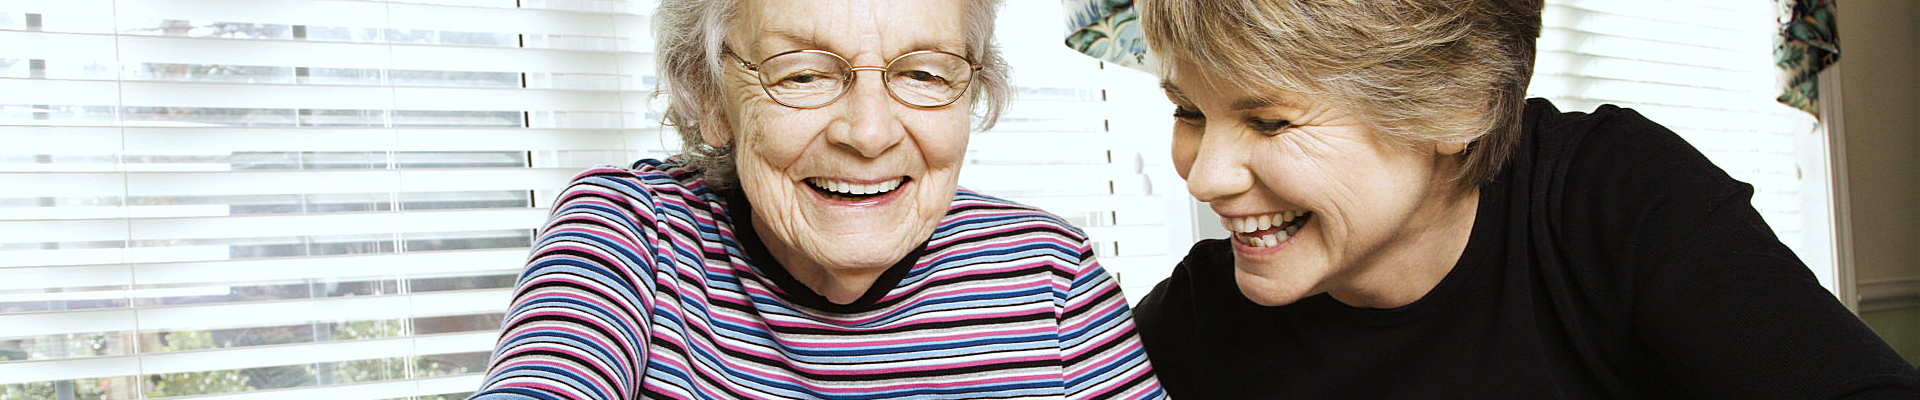 caregiver and patient laughing at something